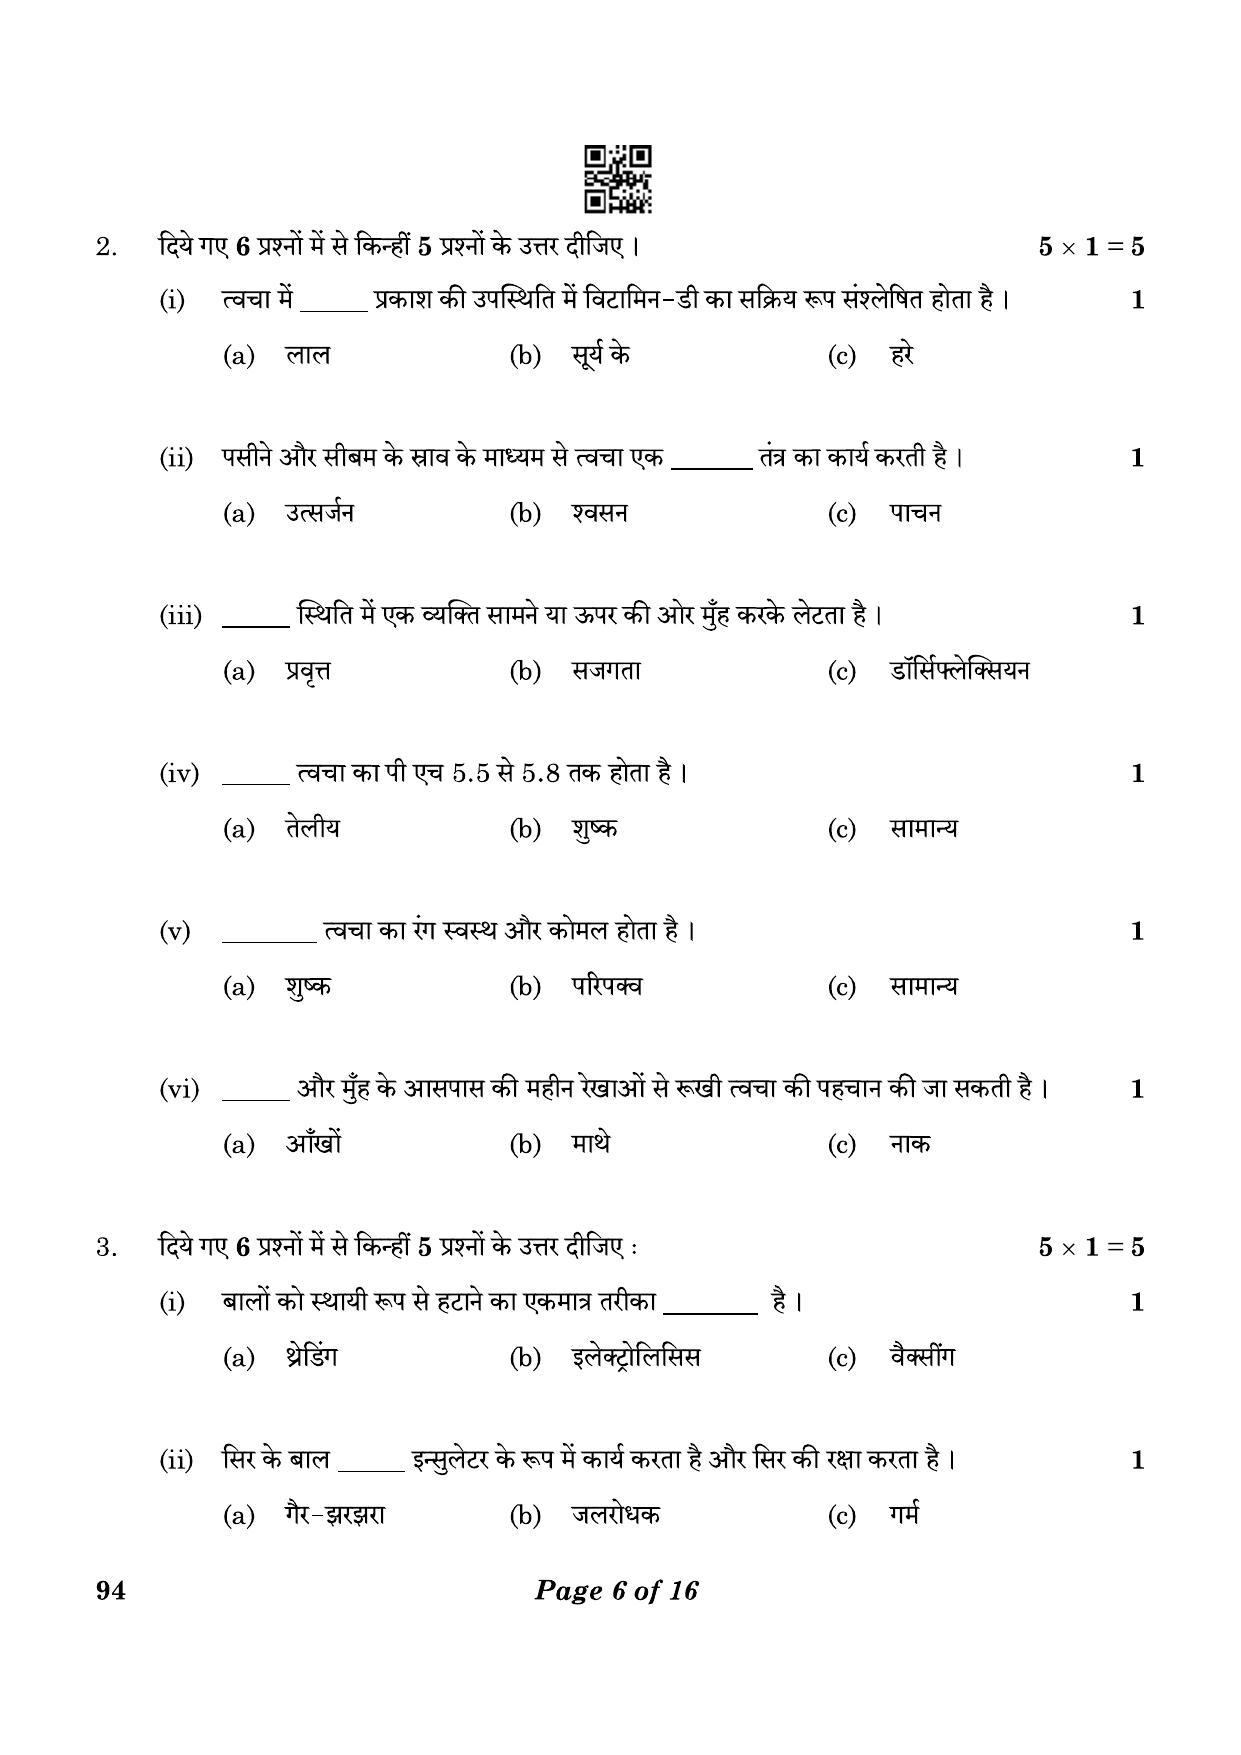 CBSE Class 10 94 Beauty And Wellness 2023 Question Paper - Page 6